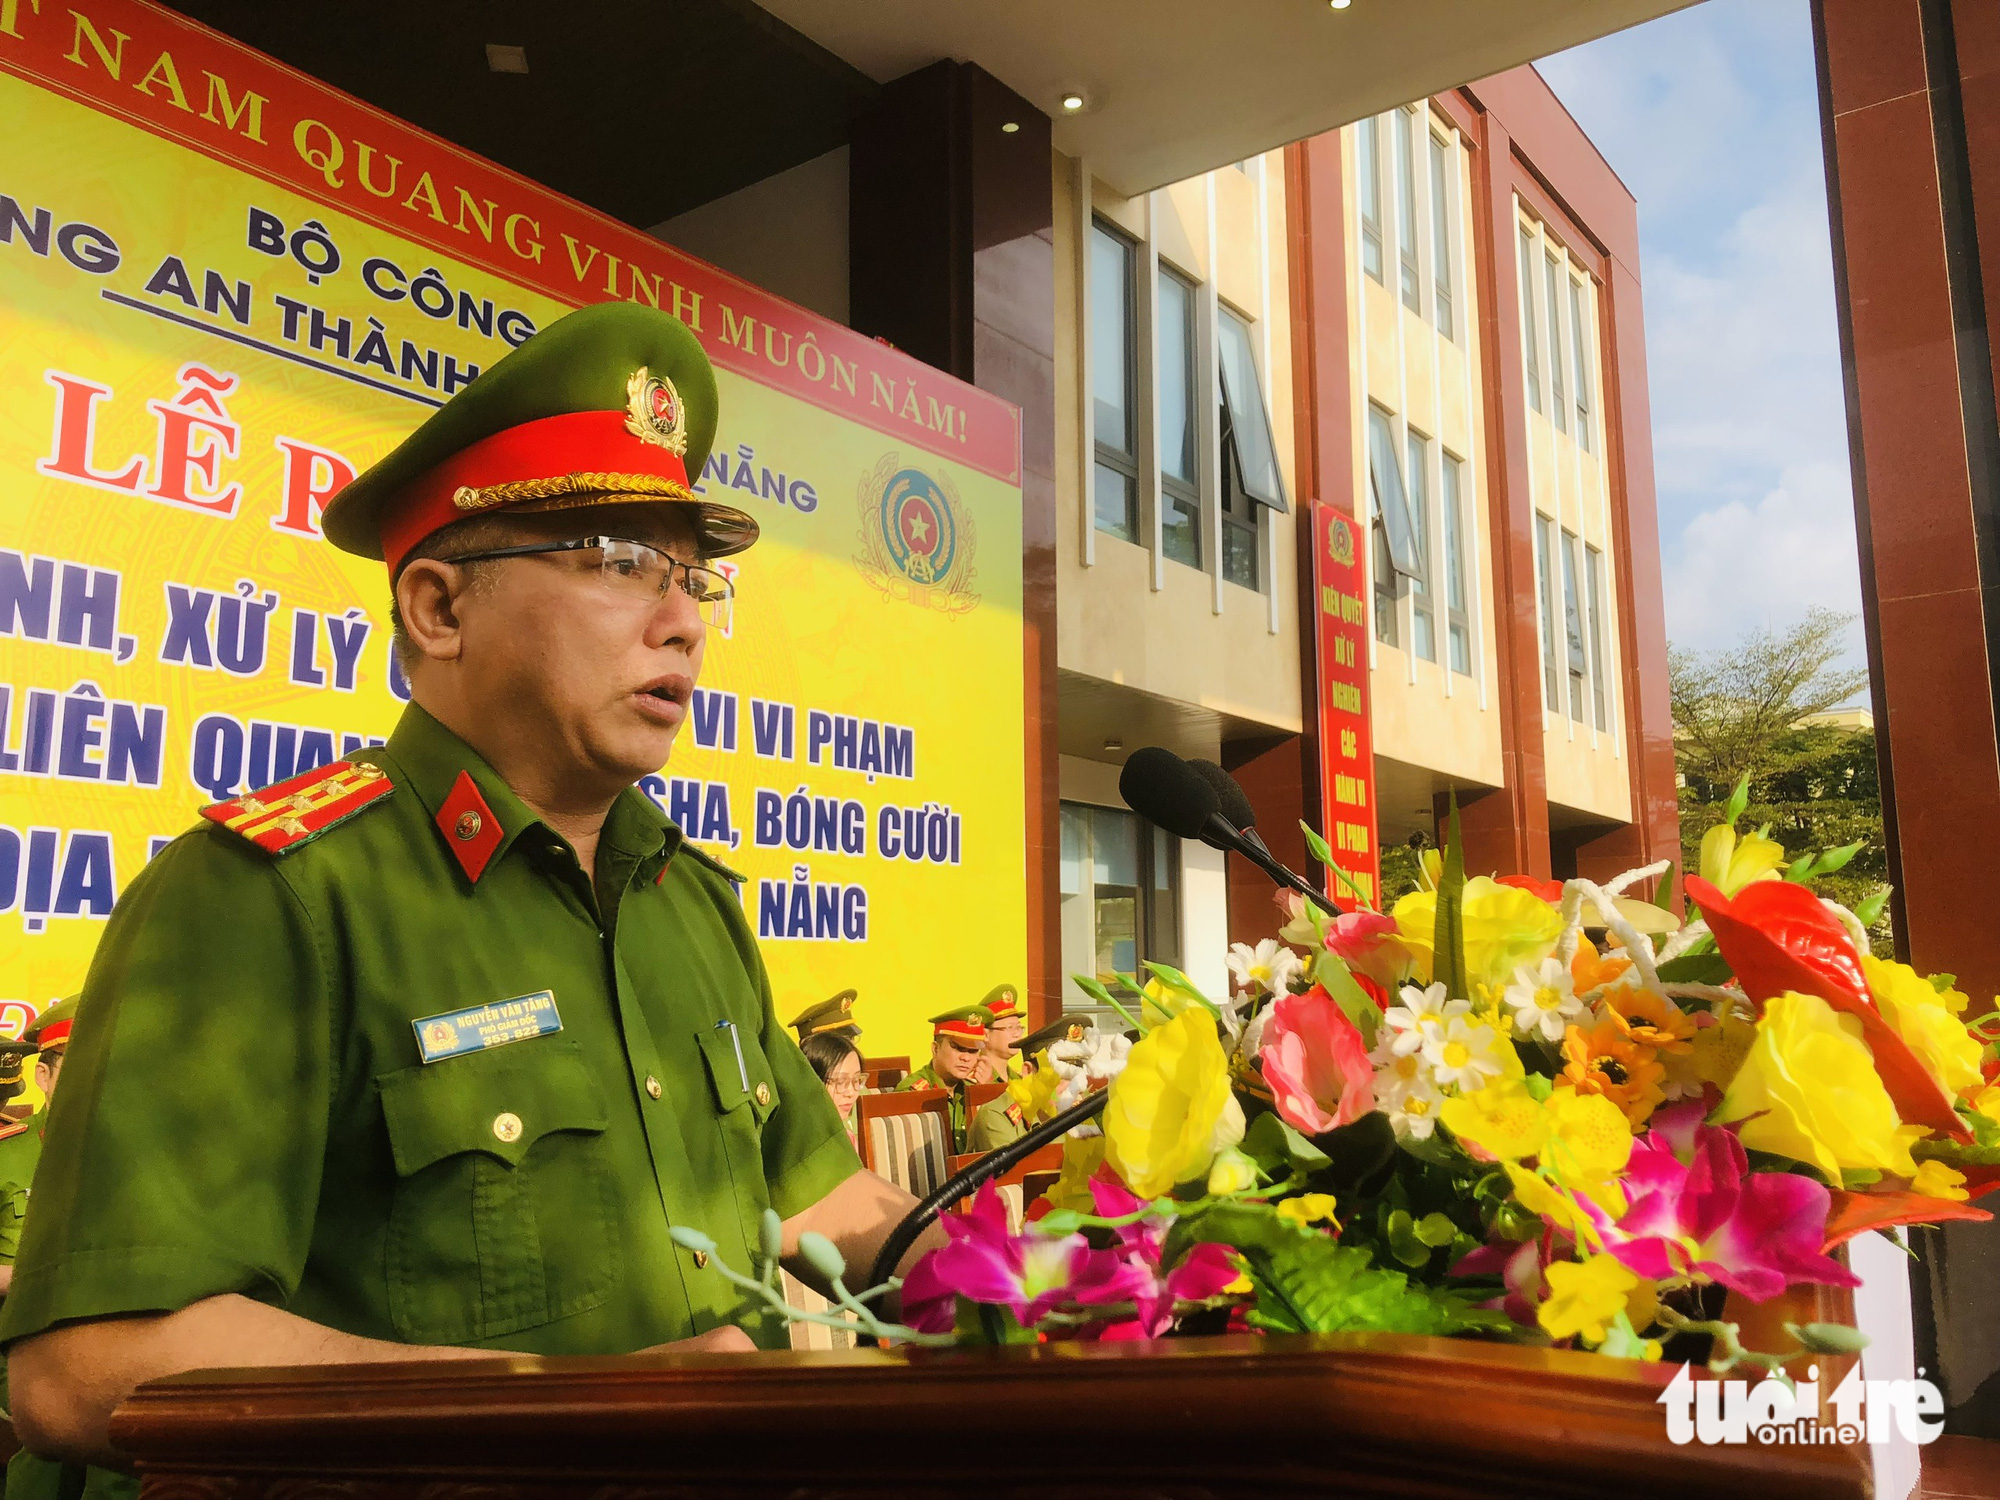 Colonel Nguyen Van Tang, deputy director of the Da Nang Department of Public Security, speaks at the event, March 3, 2023. Photo: Doan Cuong / Tuoi Tre